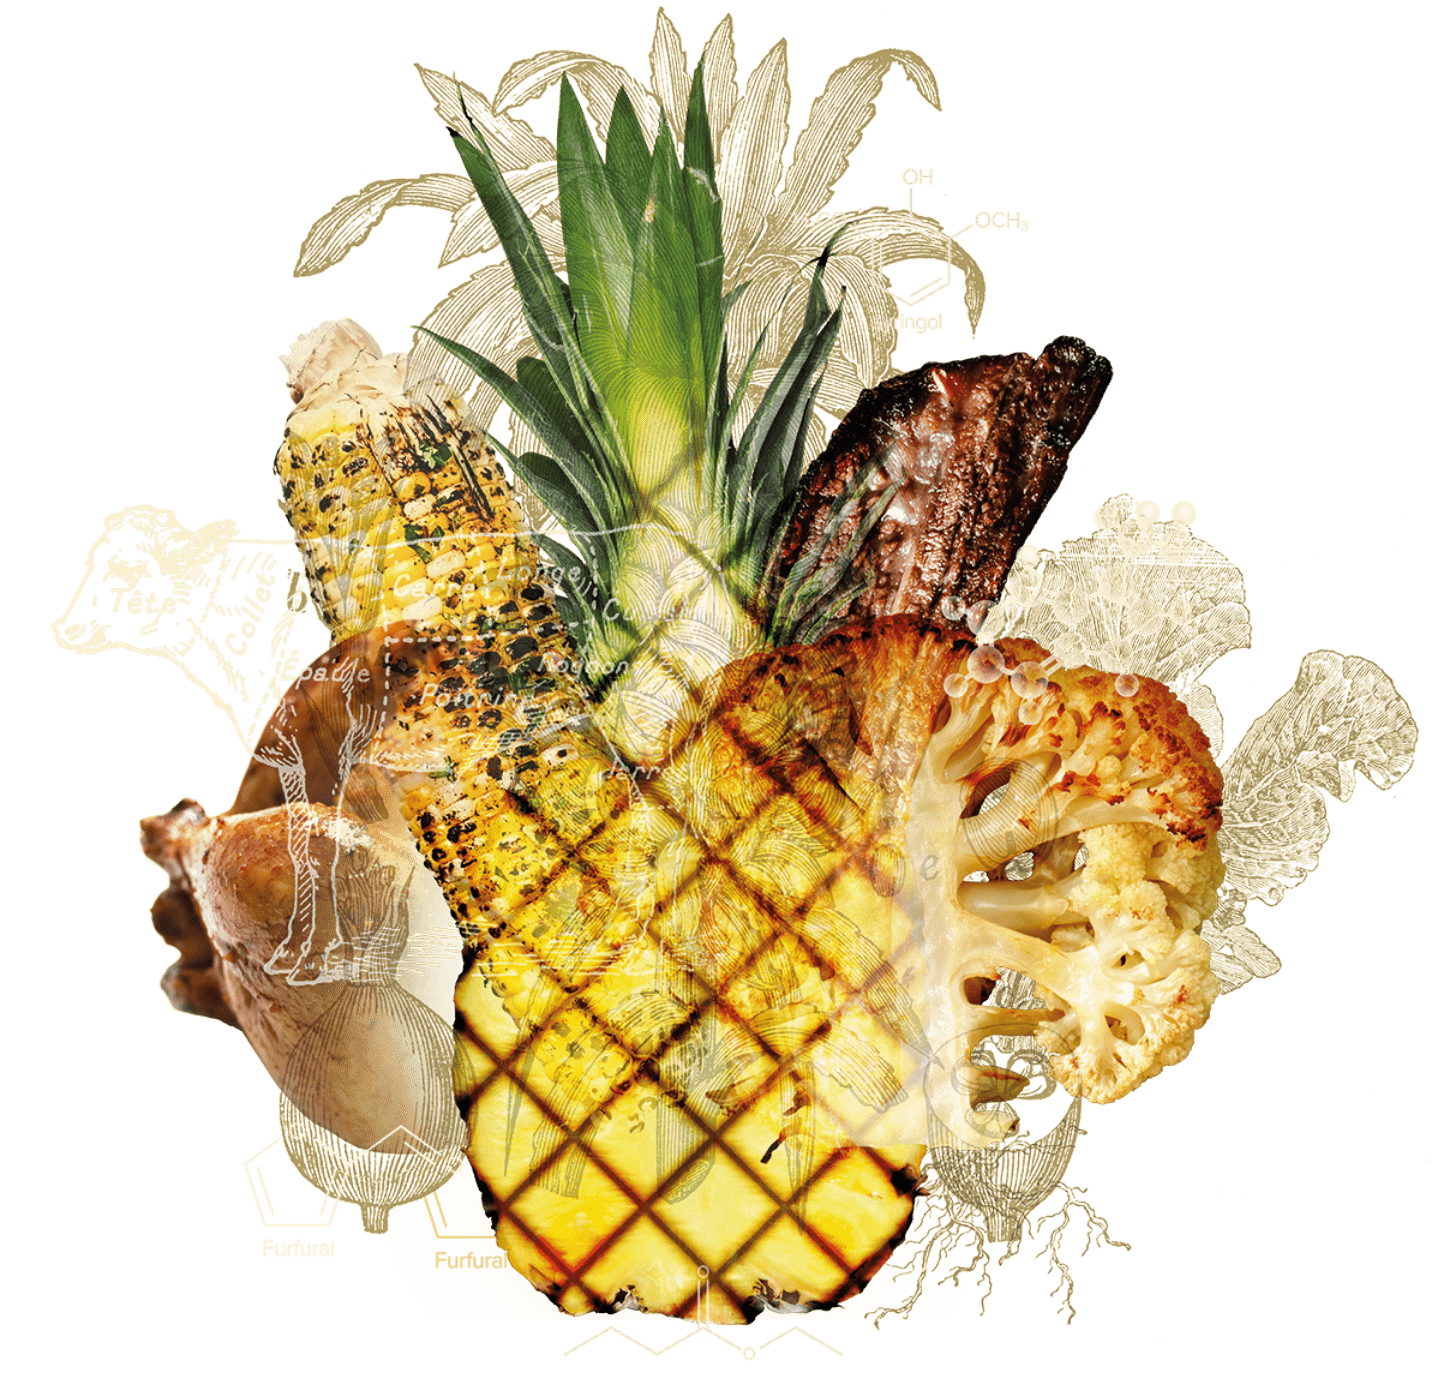 Image showing a cow, a pineapple, a cauliflower and a chicken